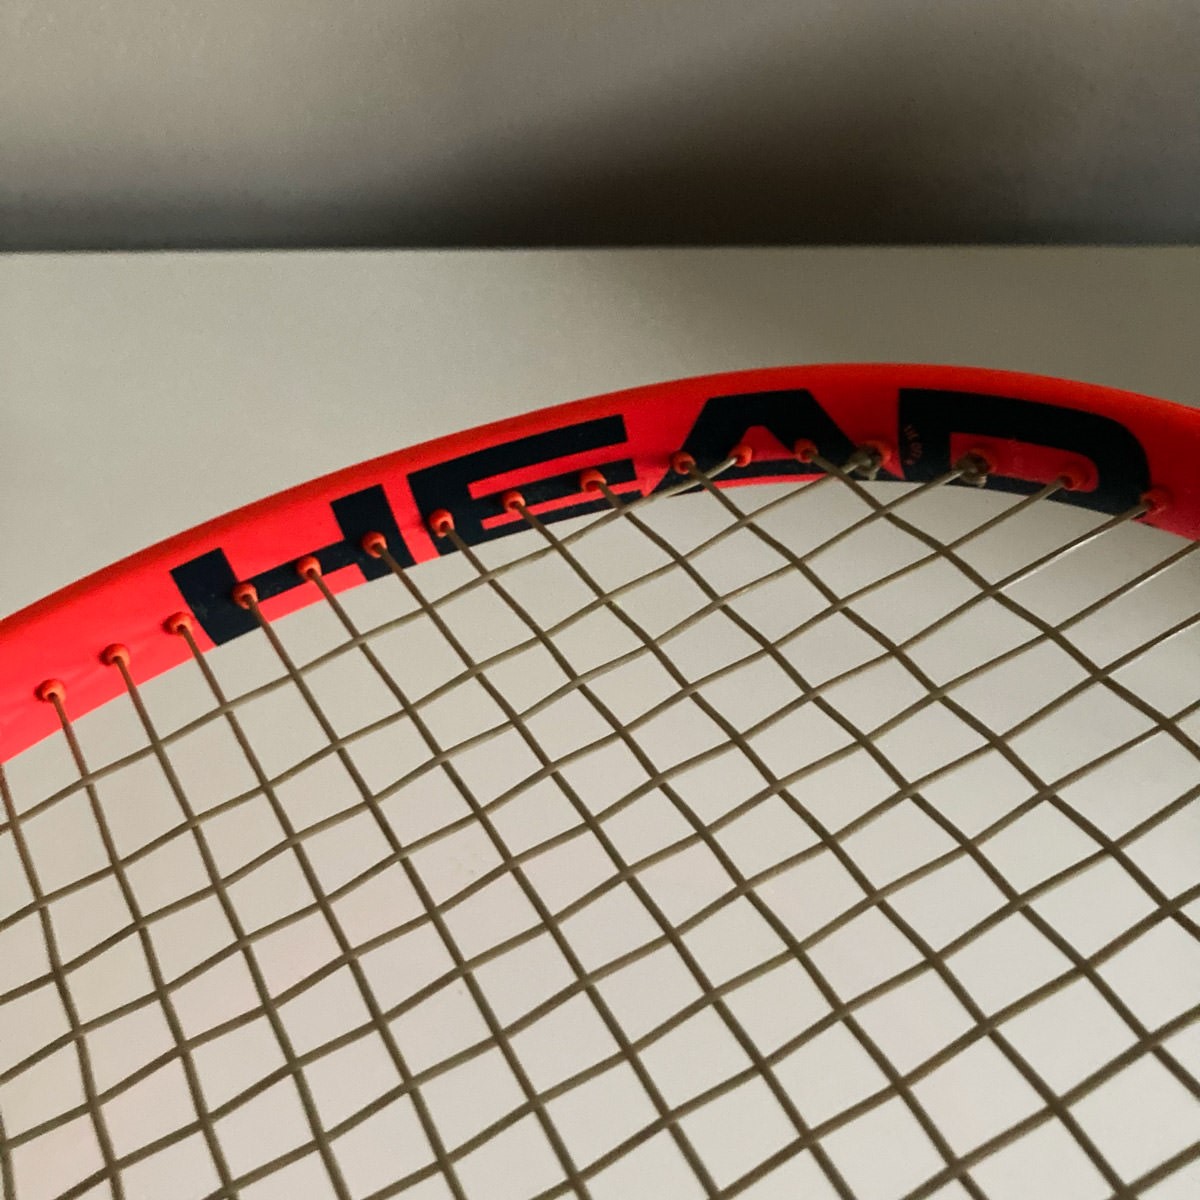 Superfried – Walk the Talk. Buying a tennis racket – Head Radical MP - strings close-up. Considering purchases to reducing my environmental impact. 